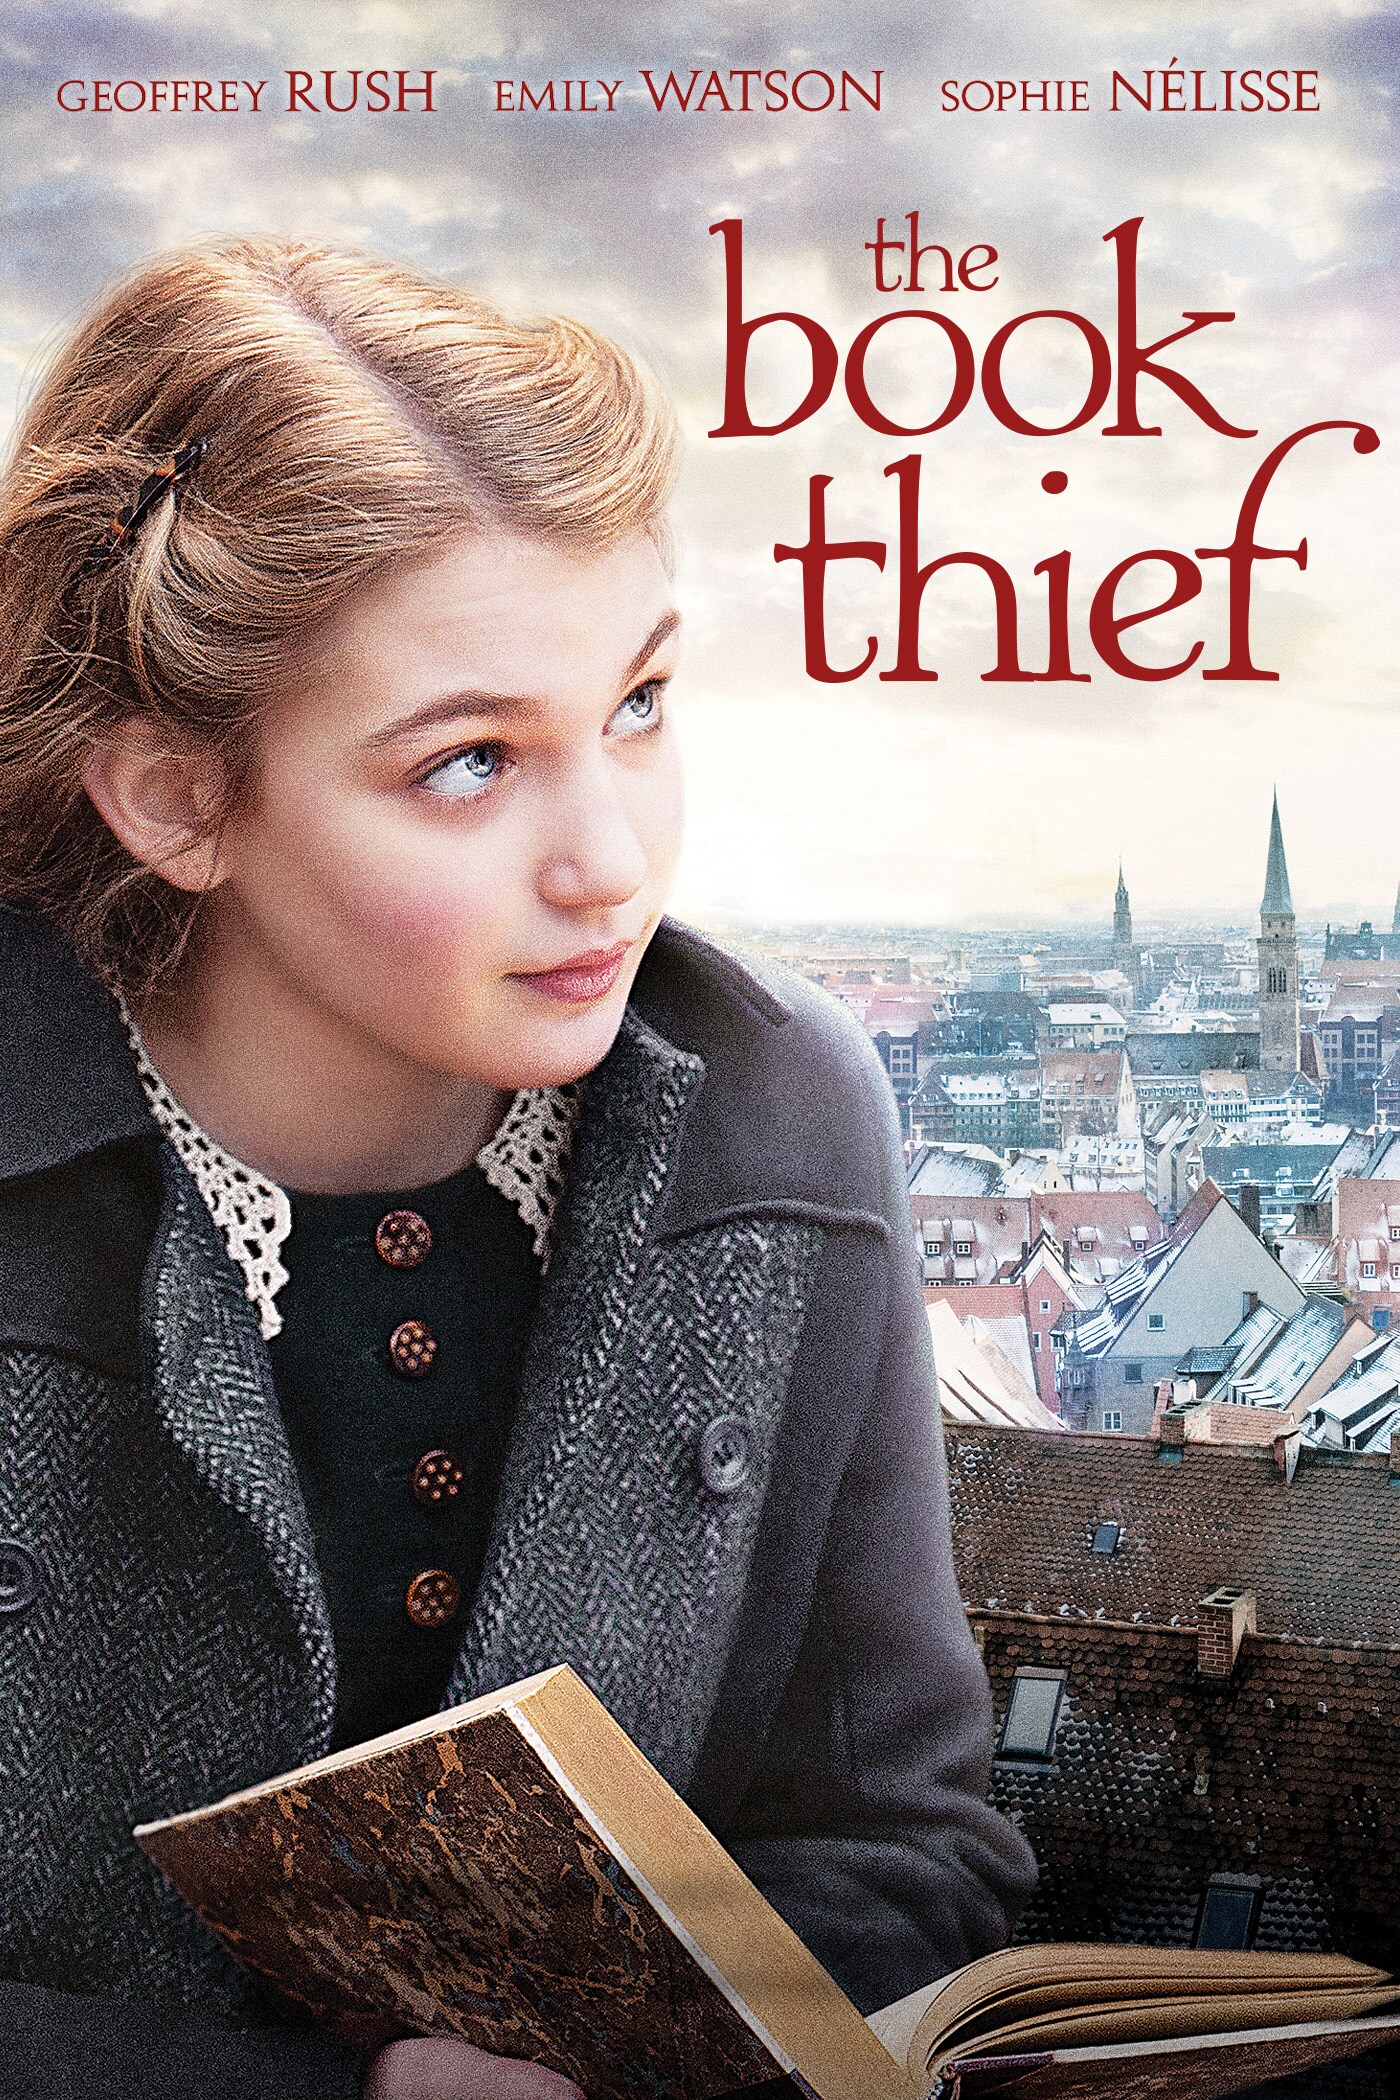 The Book Thief movie poster